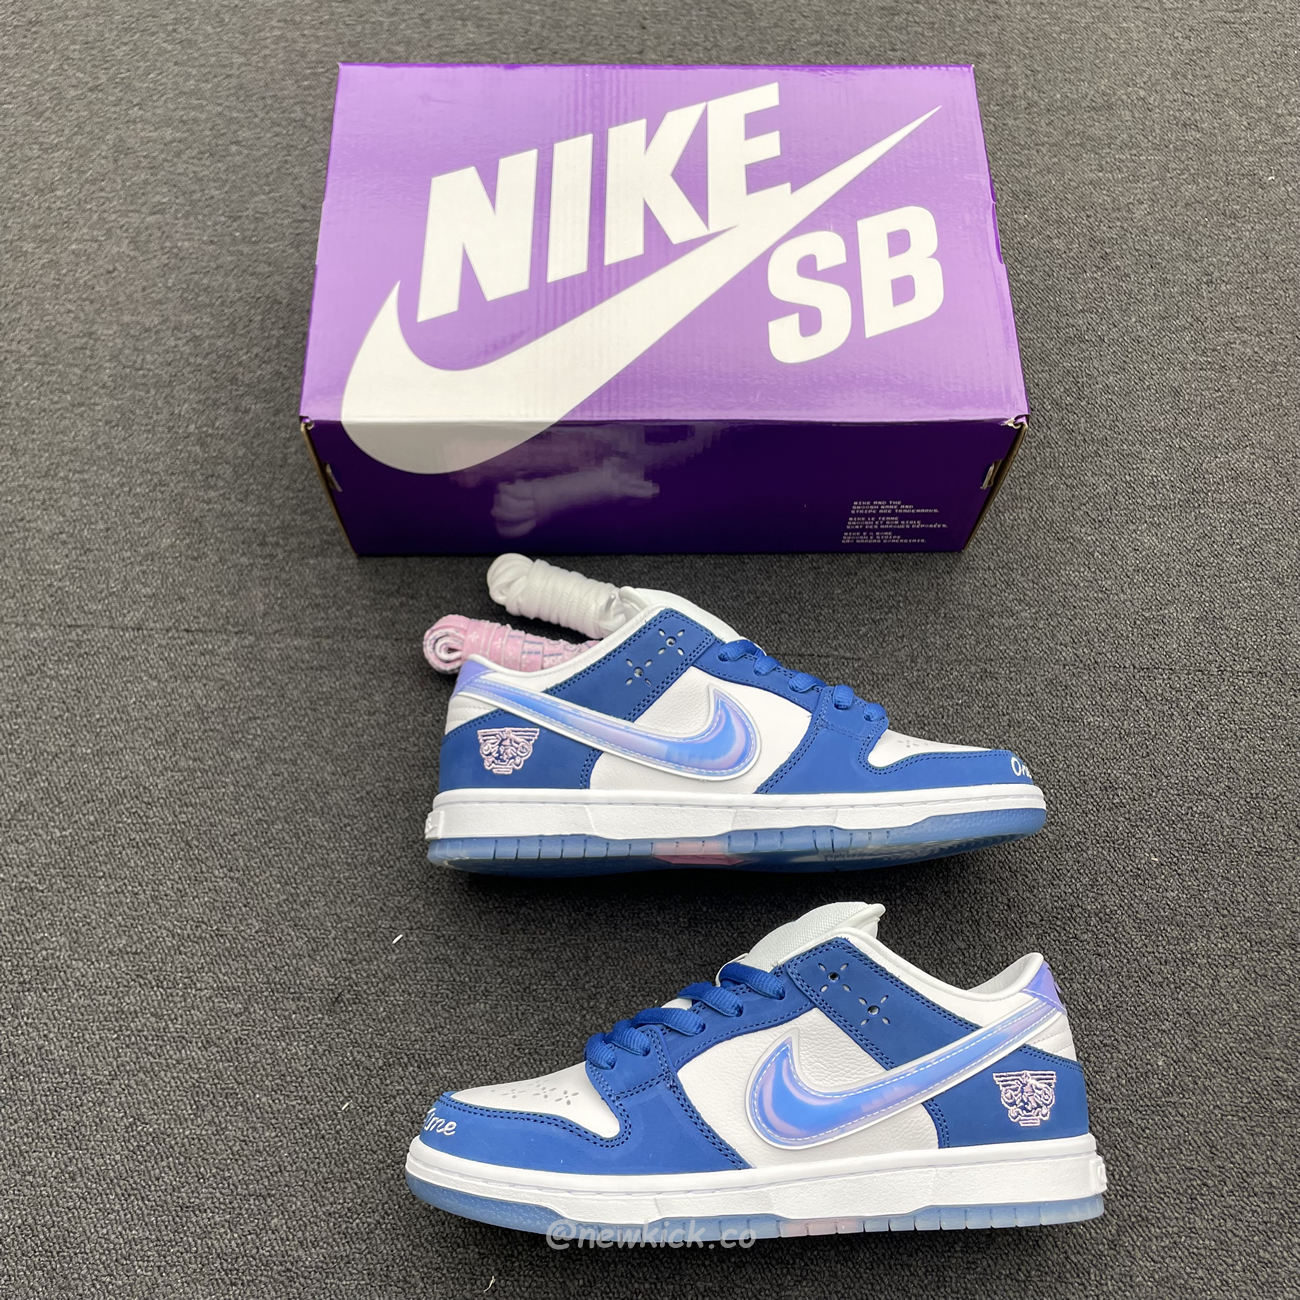 Nike Sb Dunk Low Born X Raised One Block At A Time Fn7819 400 (2) - newkick.org